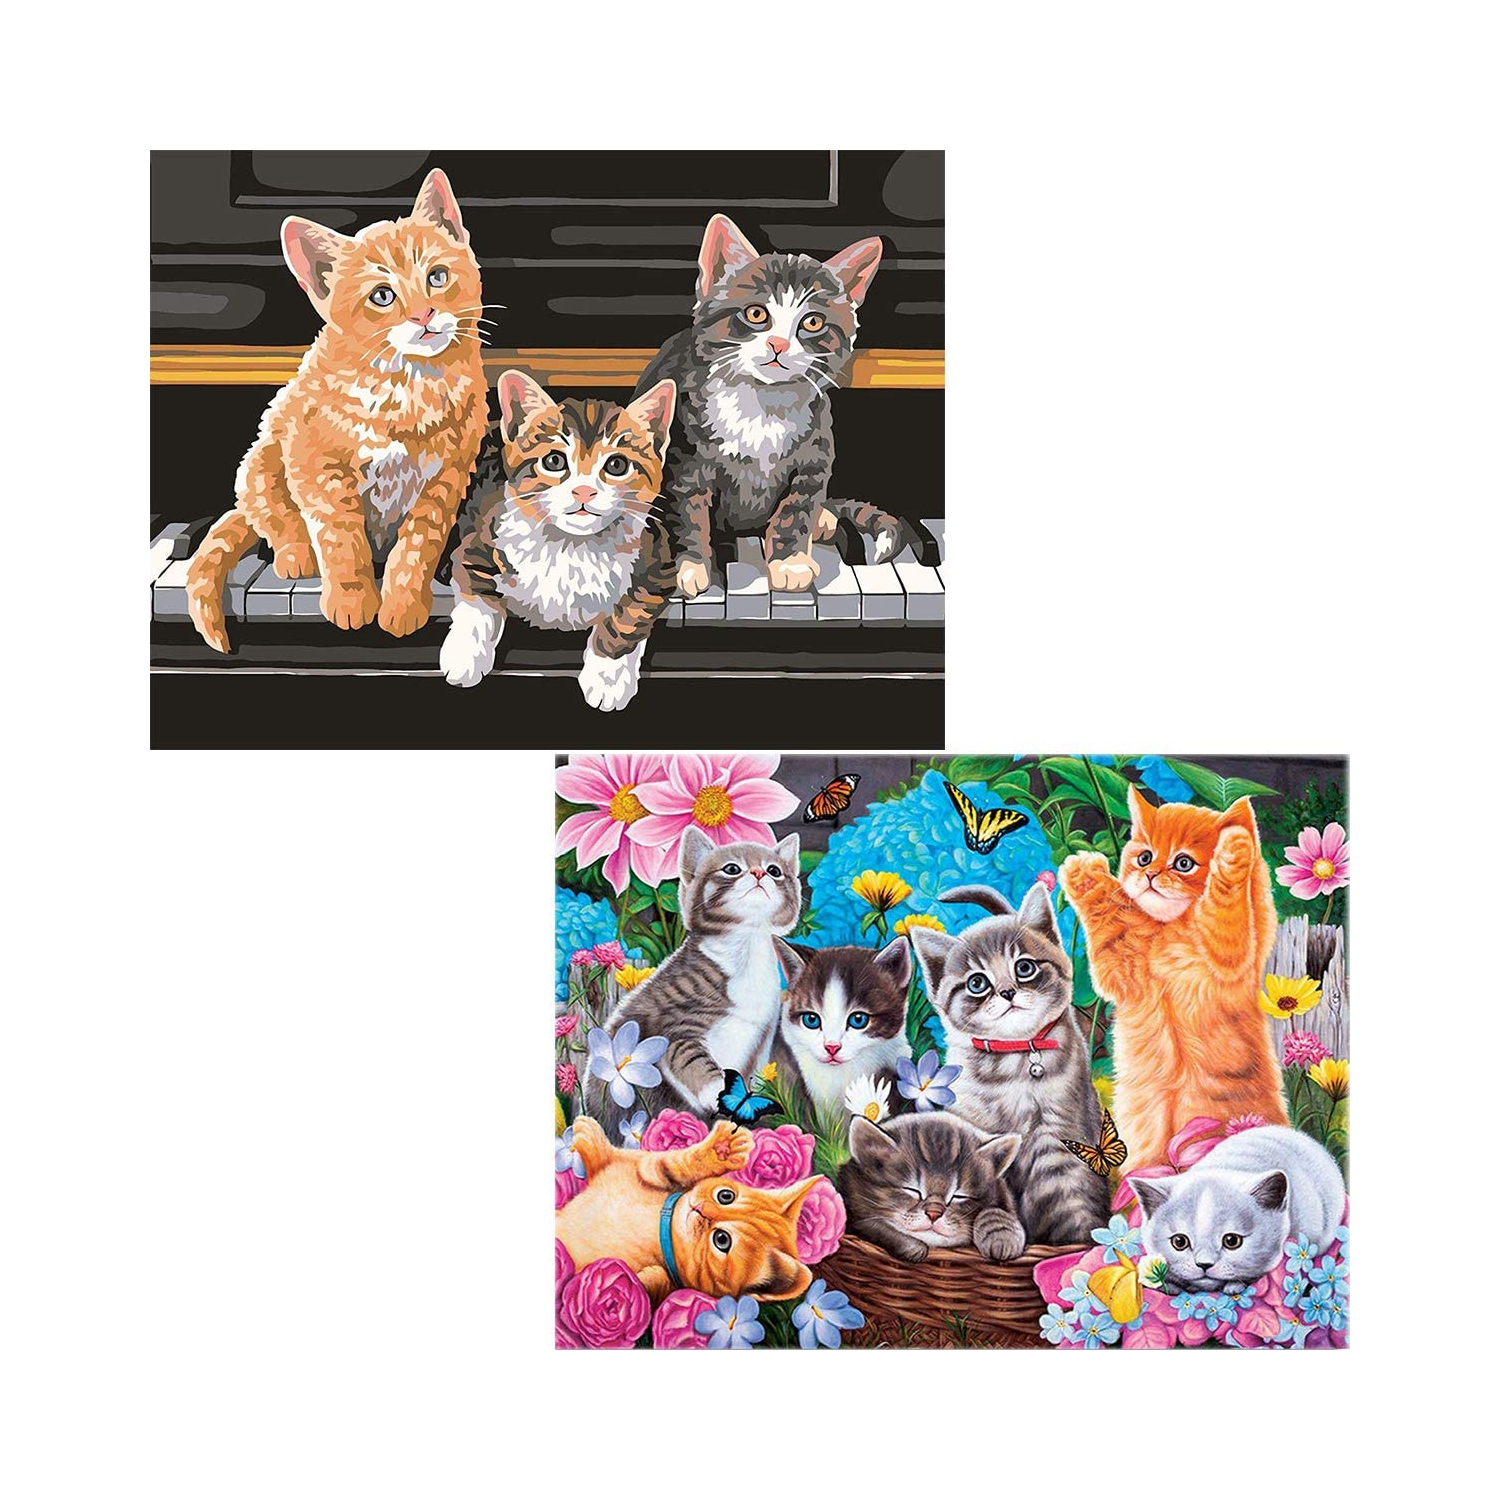 Ginfonr 5D DIY Diamond Painting Kit Piano Cats & Garden Kittens for Adults Full Drill by Number Kits, Pet Paint with Diamonds